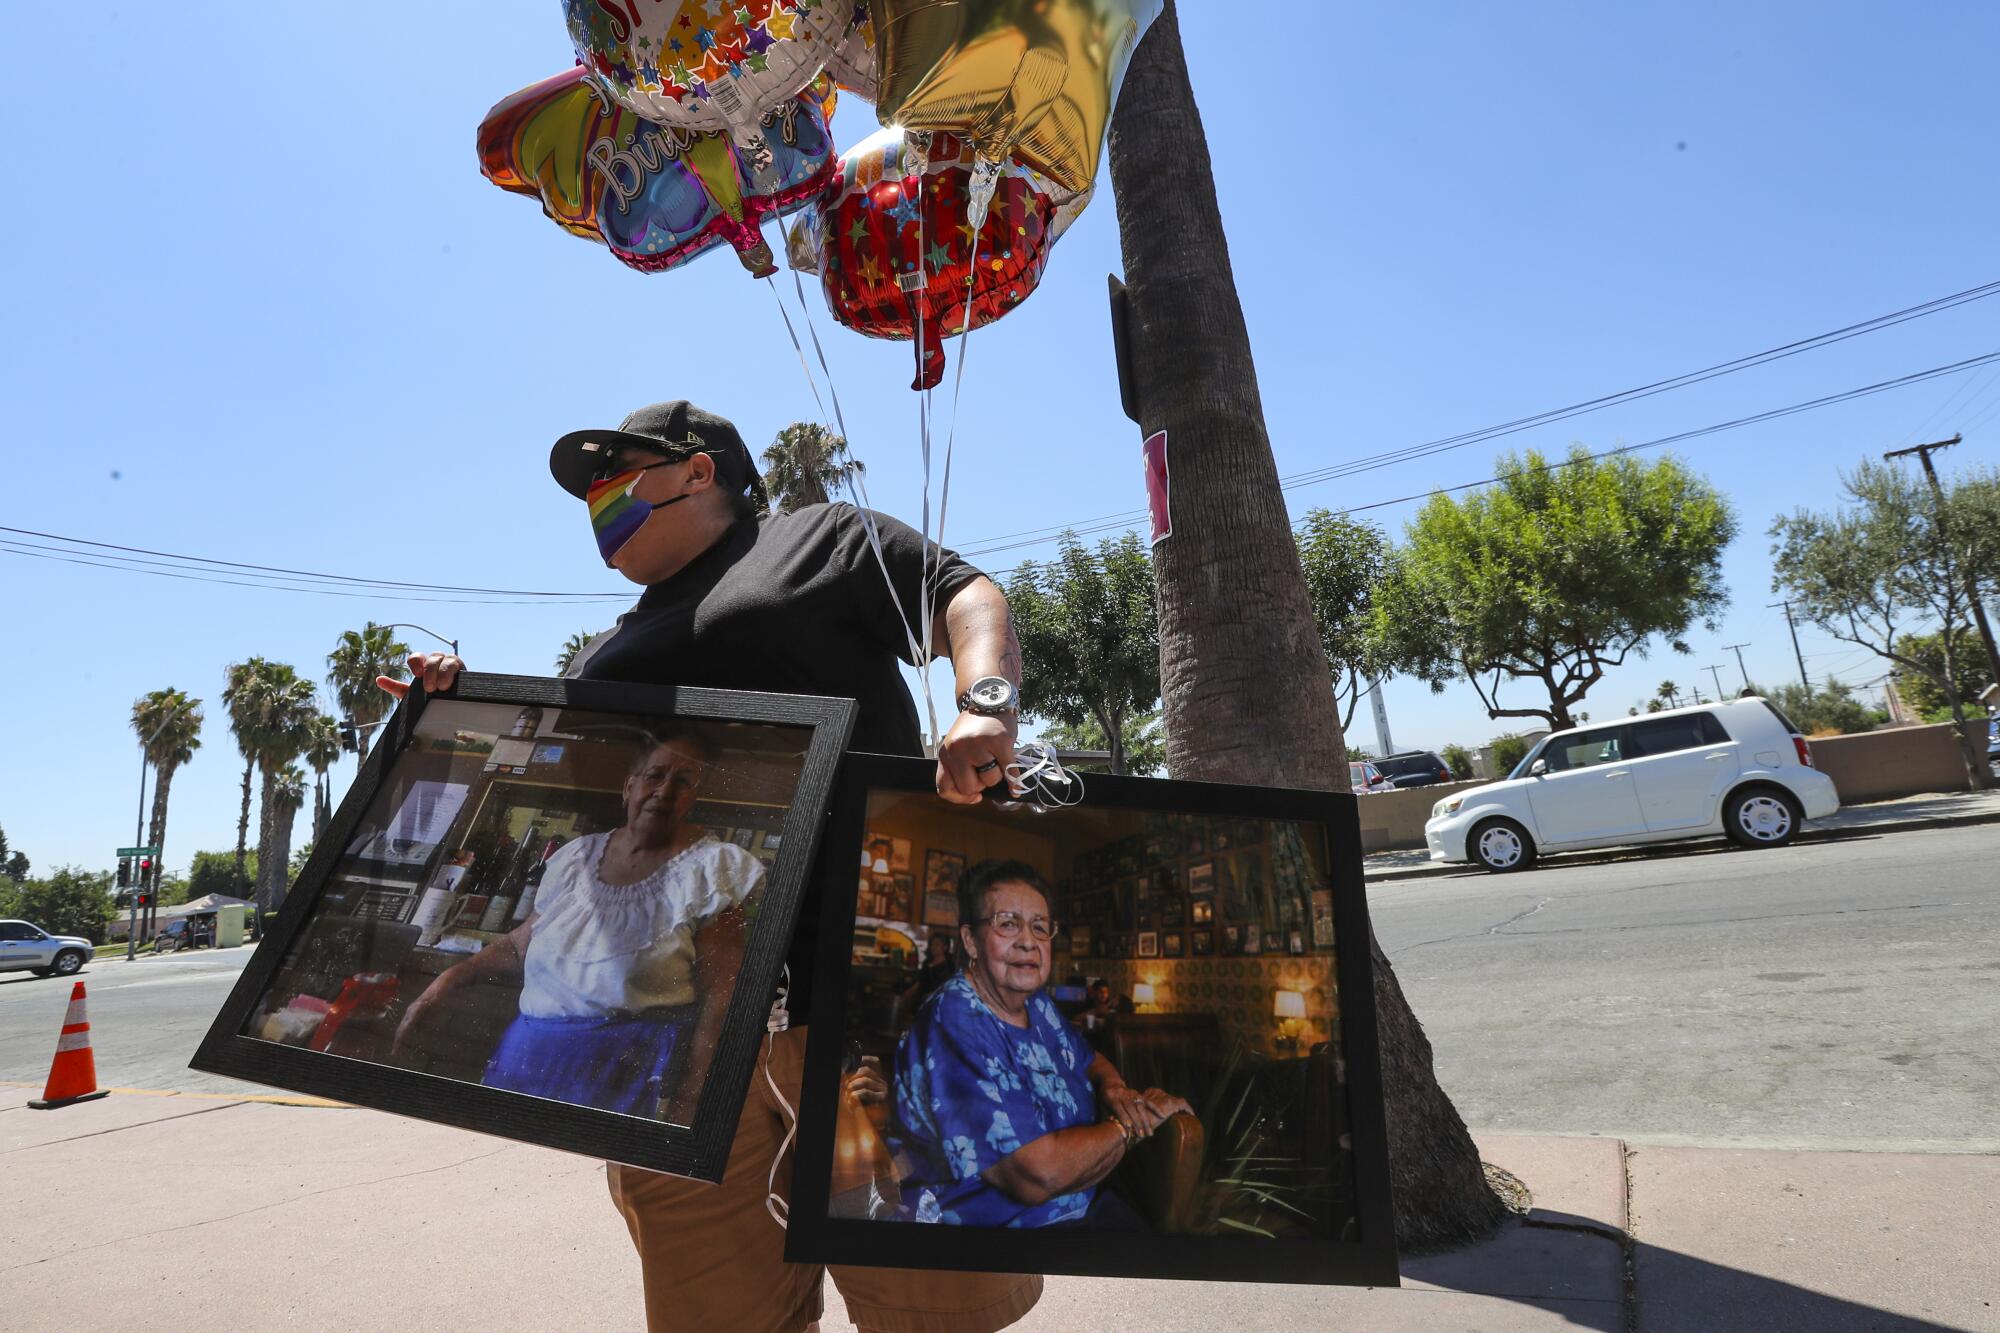 Denise Vara brings balloons and photos of Lucy Reyes to the memorial service.